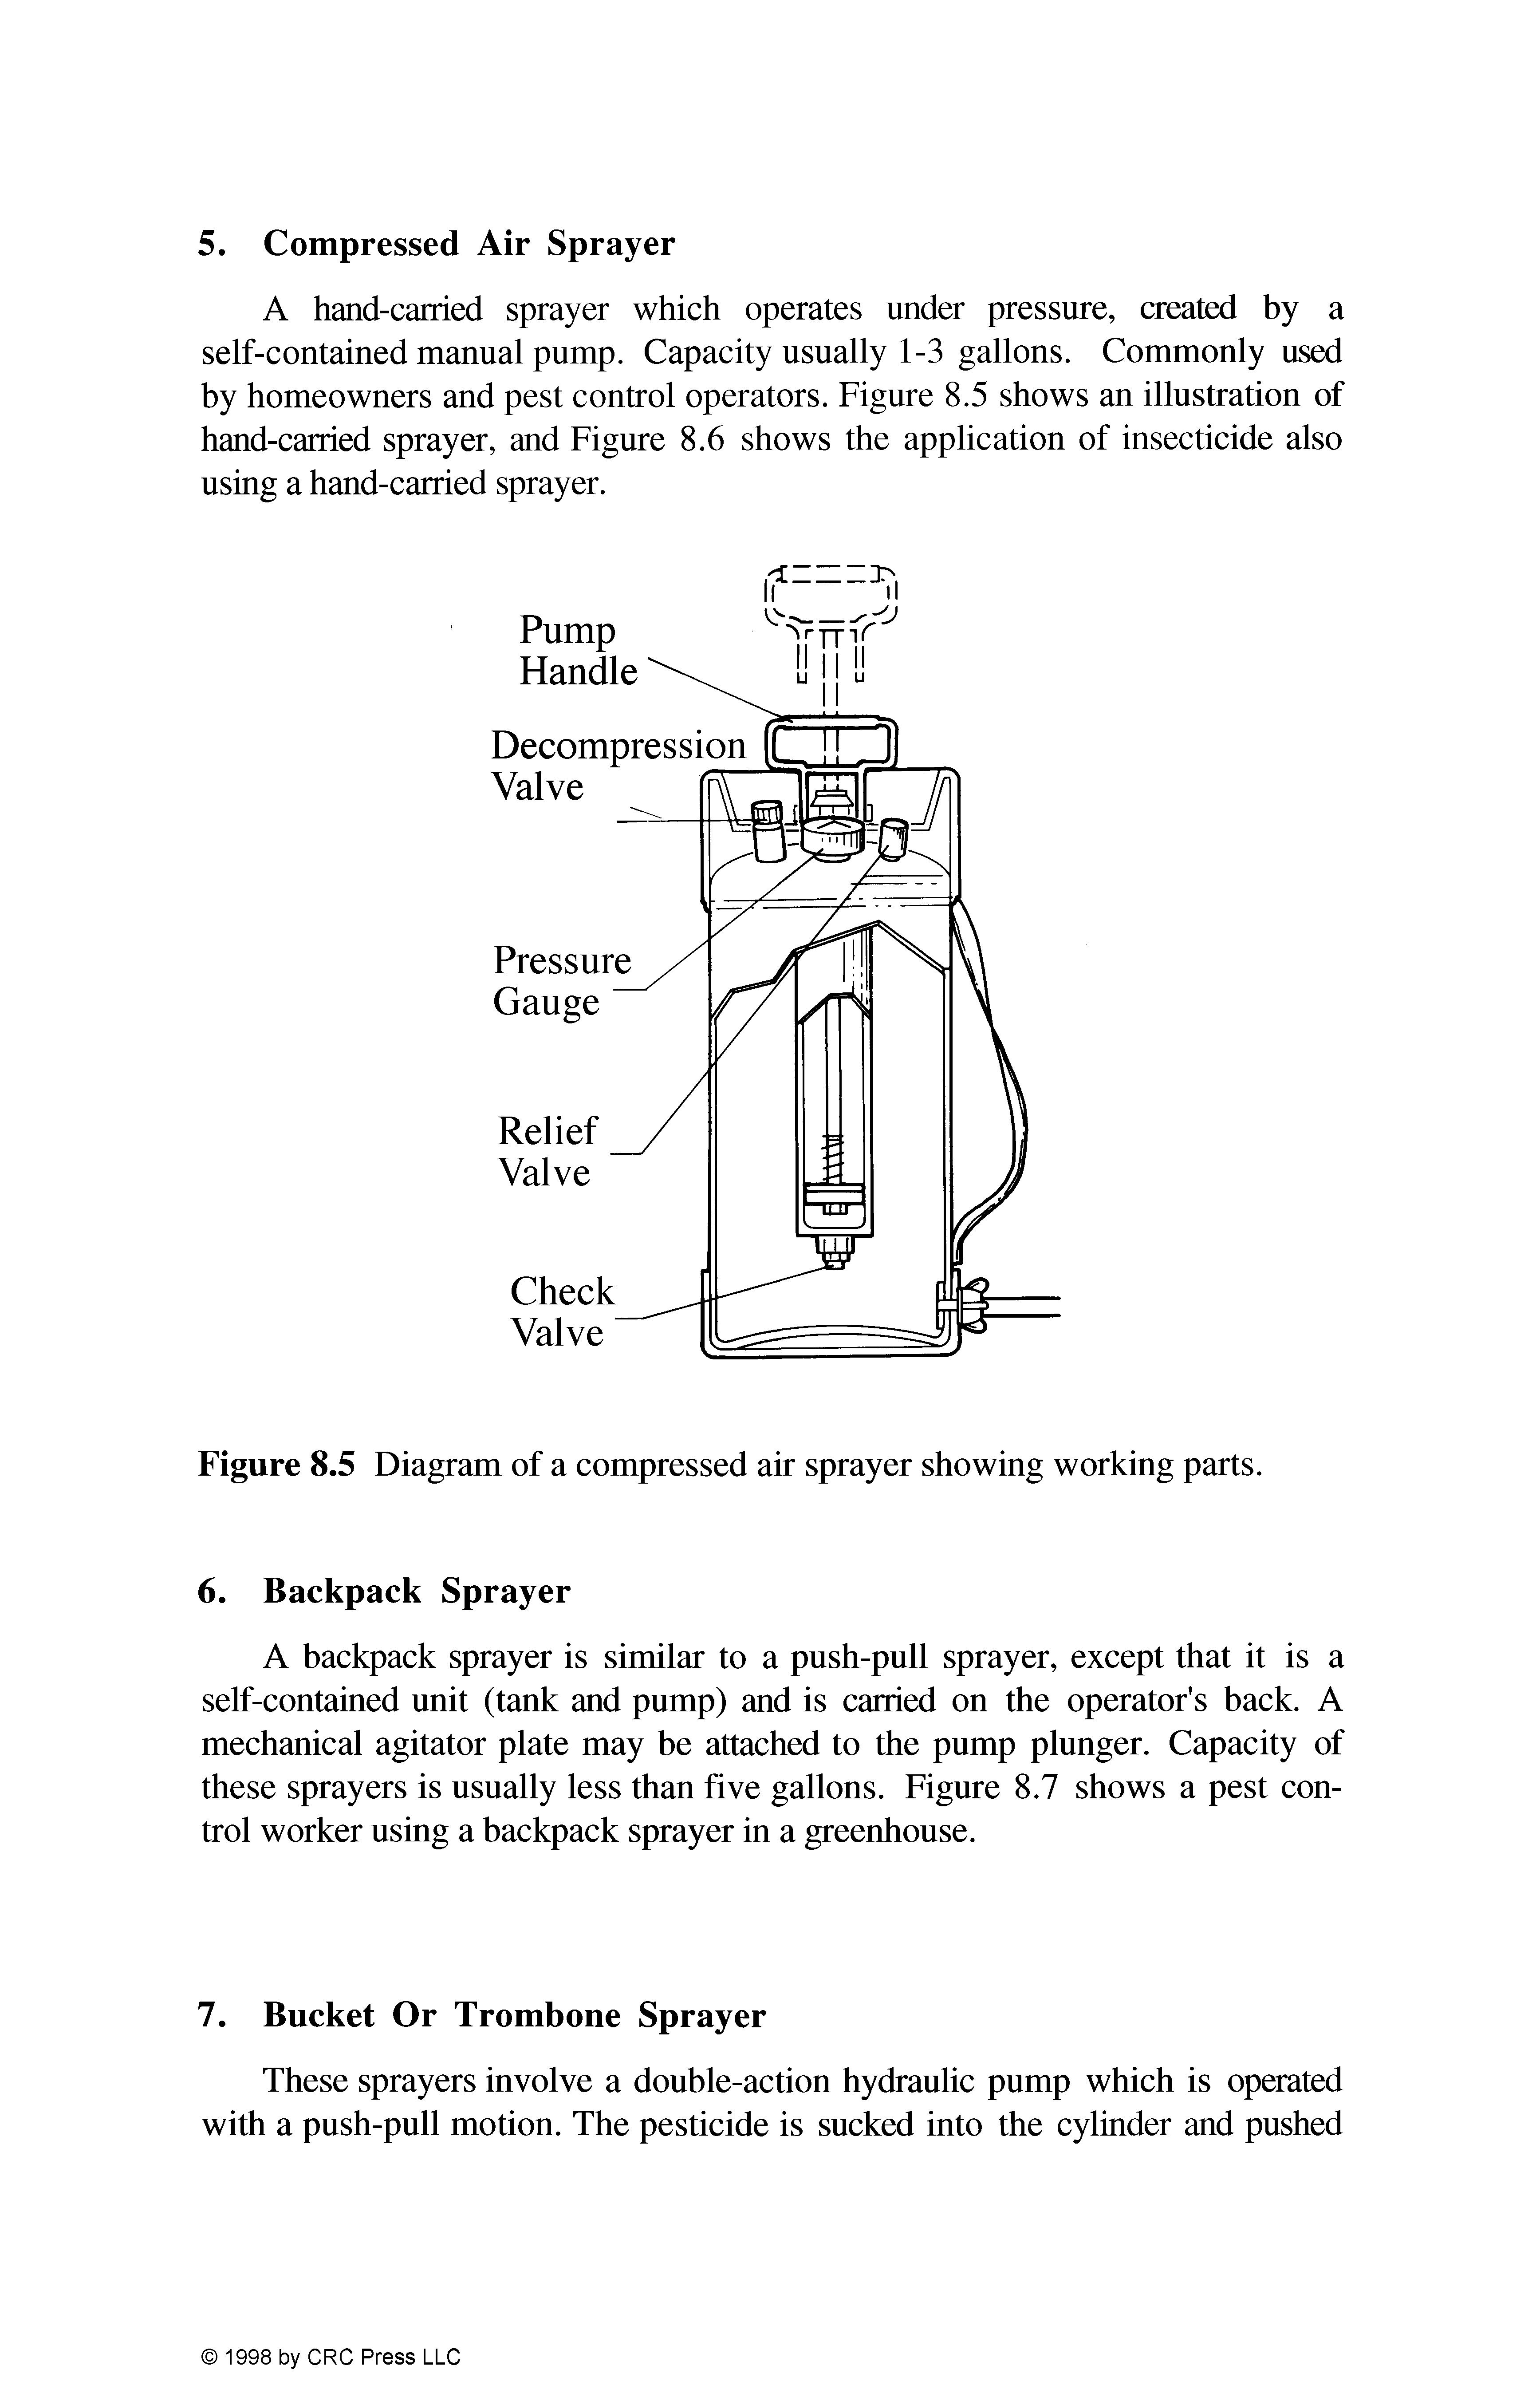 Figure 8.5 Diagram of a compressed air sprayer showing working parts.